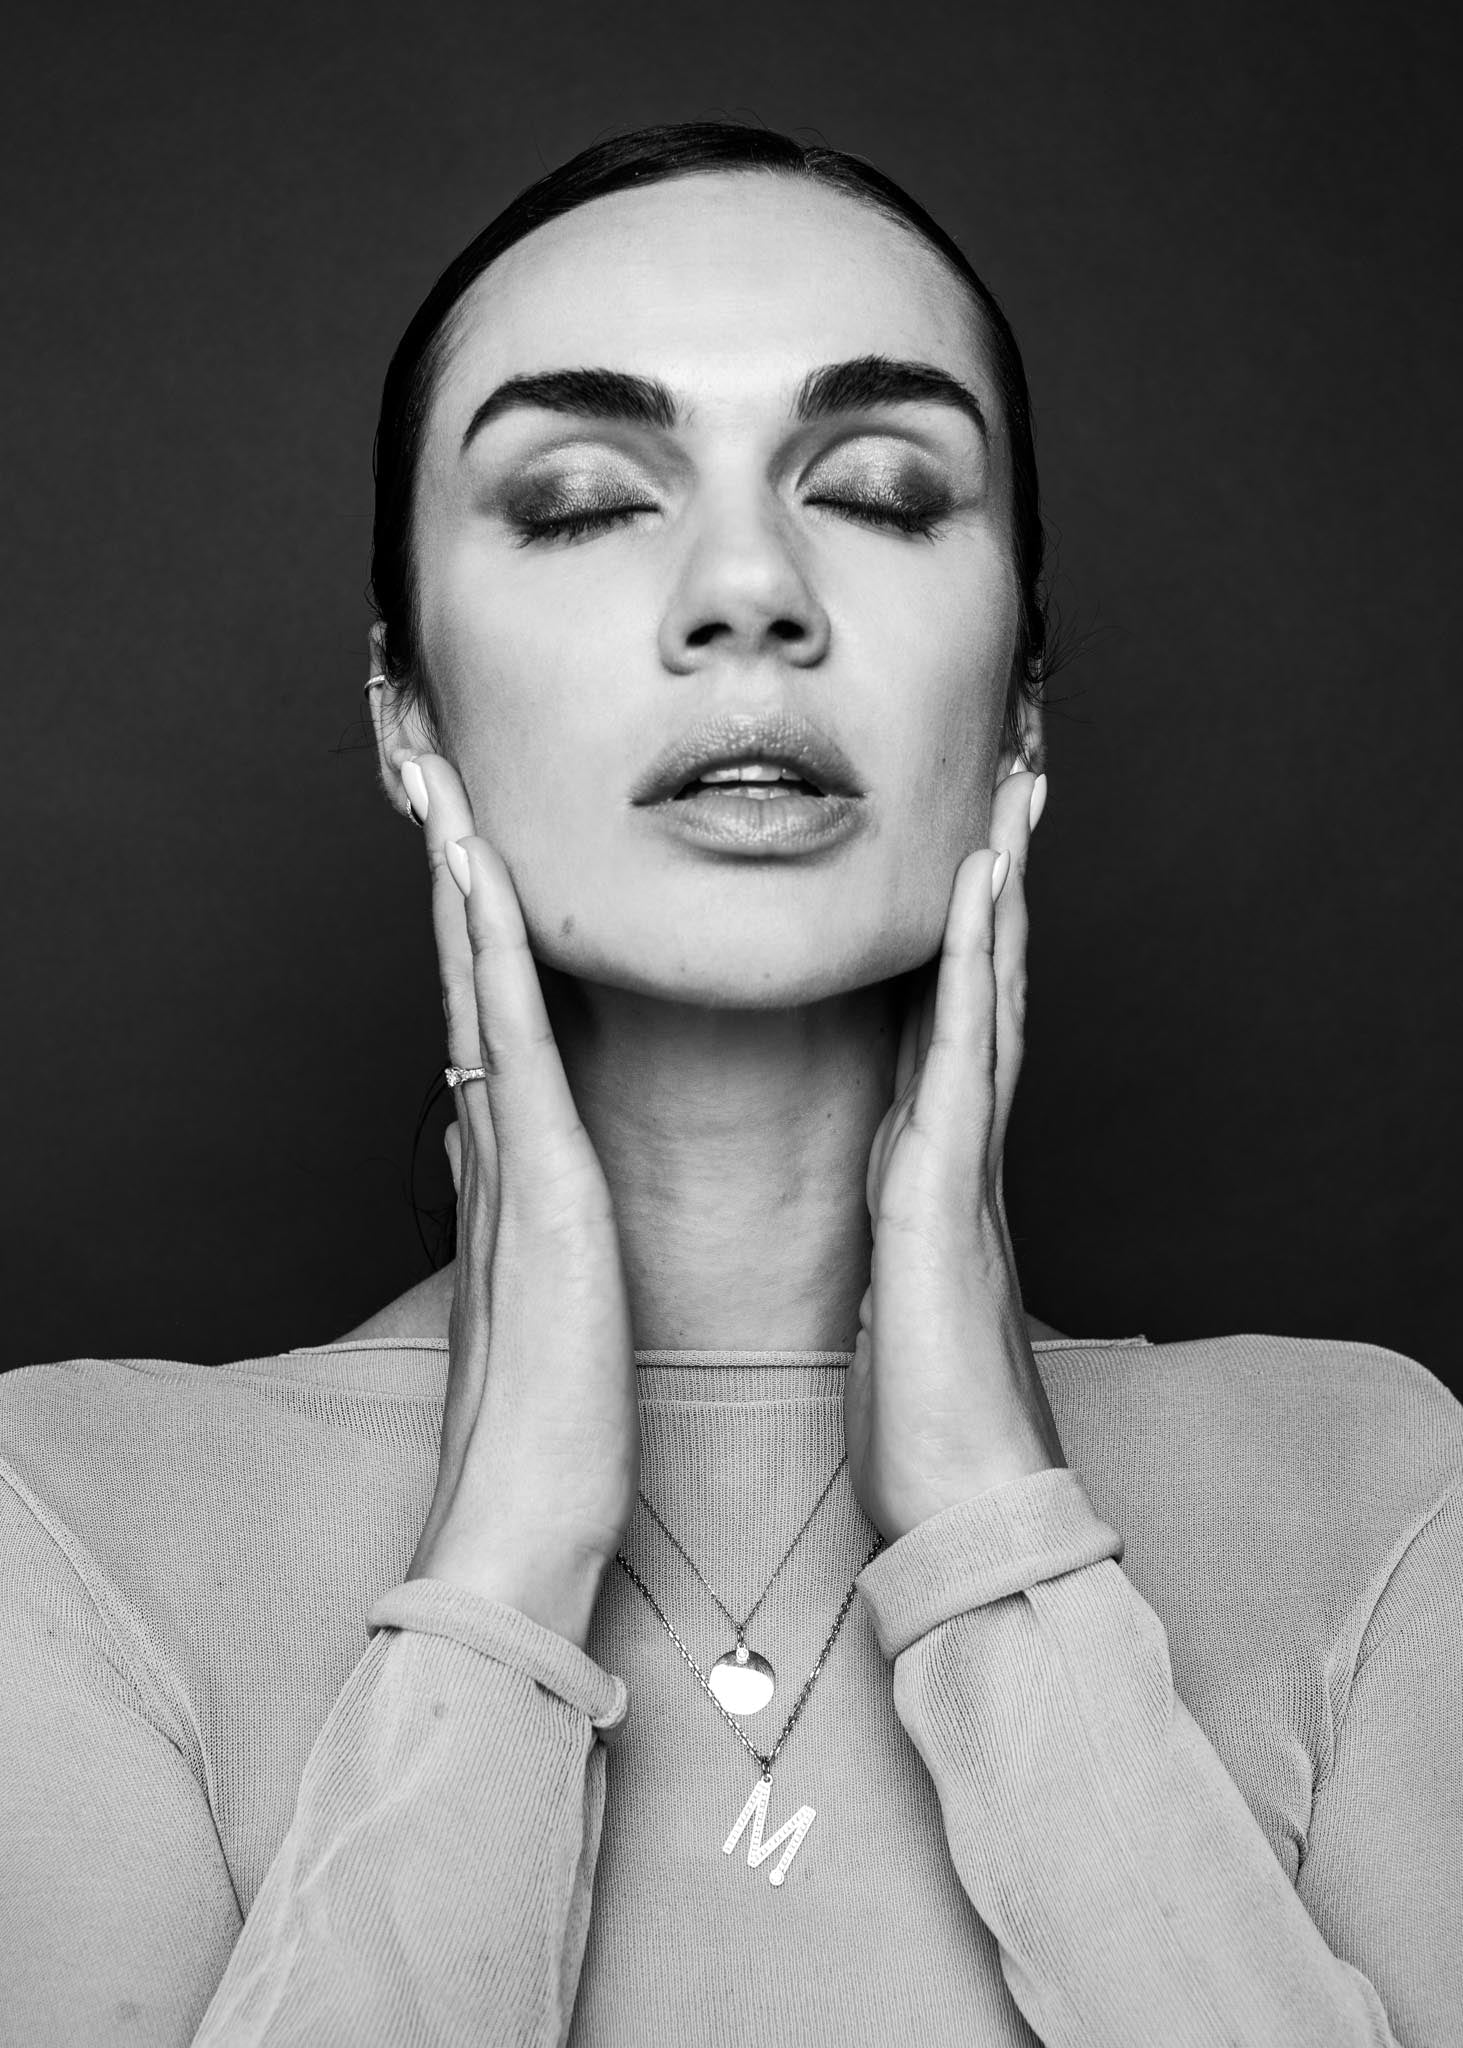 Formes Fine Jewelry with lab grown diamonds 2021 - 2022 campaign with Justina Jarute